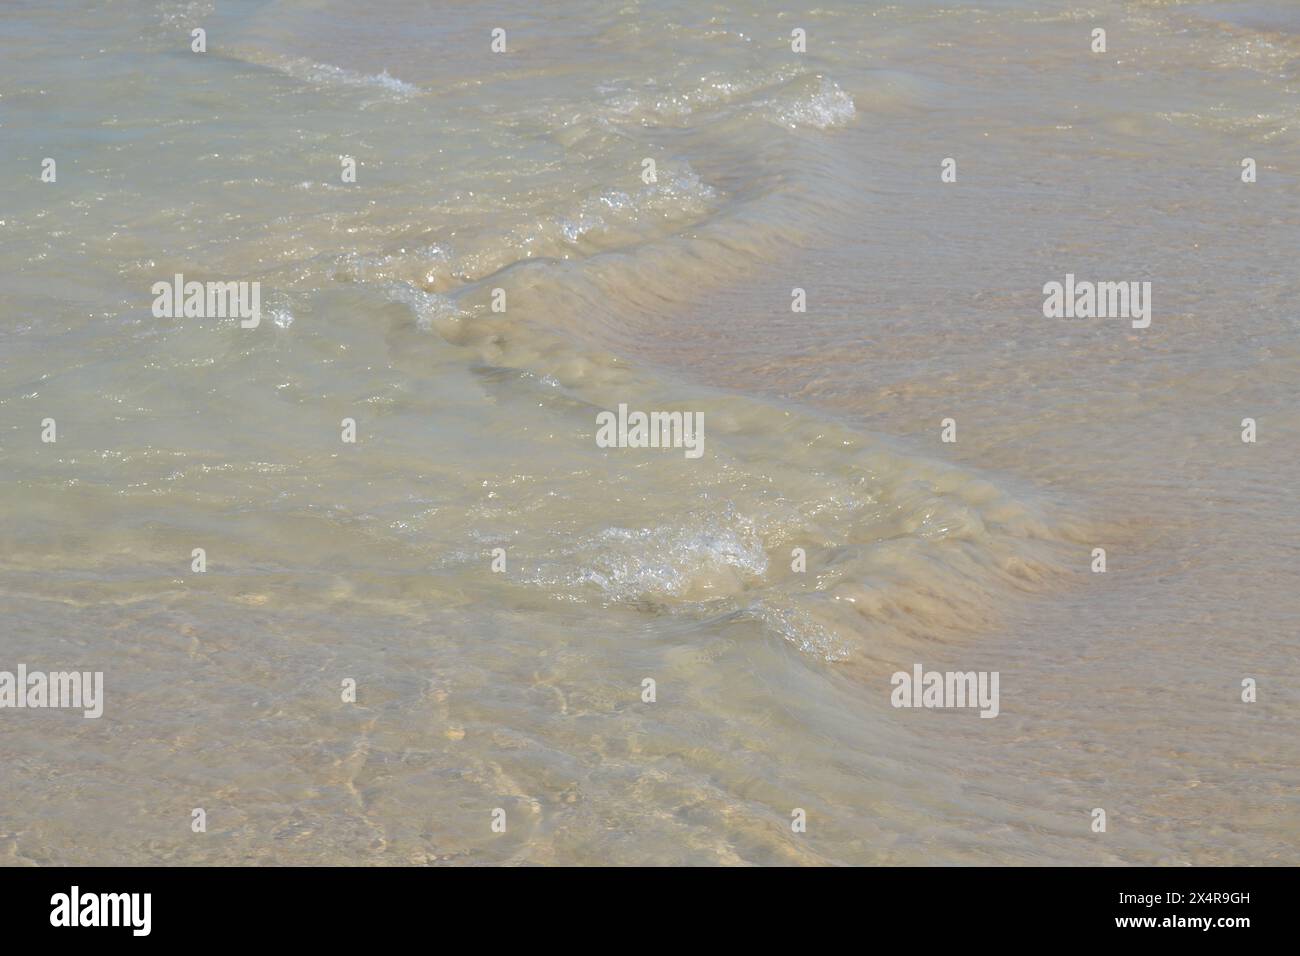 At Ponce Inlet Beach, Florida, the ocean's edge sends water rushing over the sand, creating herringbone-patterned, washed-out ripples. Stock Photo